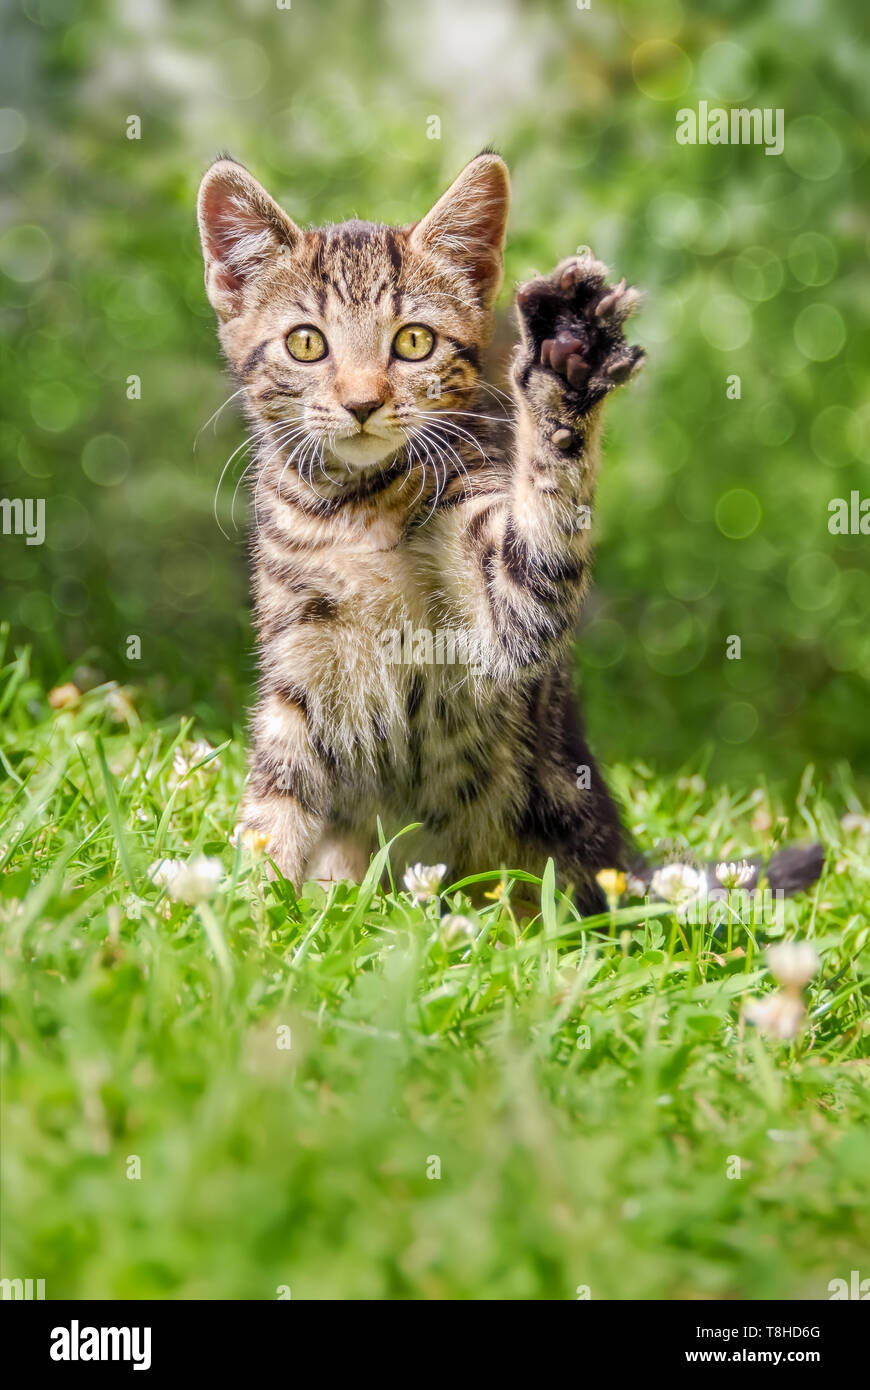 Cute tabby cat kitten sitting playfully on a green grass meadow in a garden holding up the left paw, a real beckoning cat pose, a sunny day in spring Stock Photo